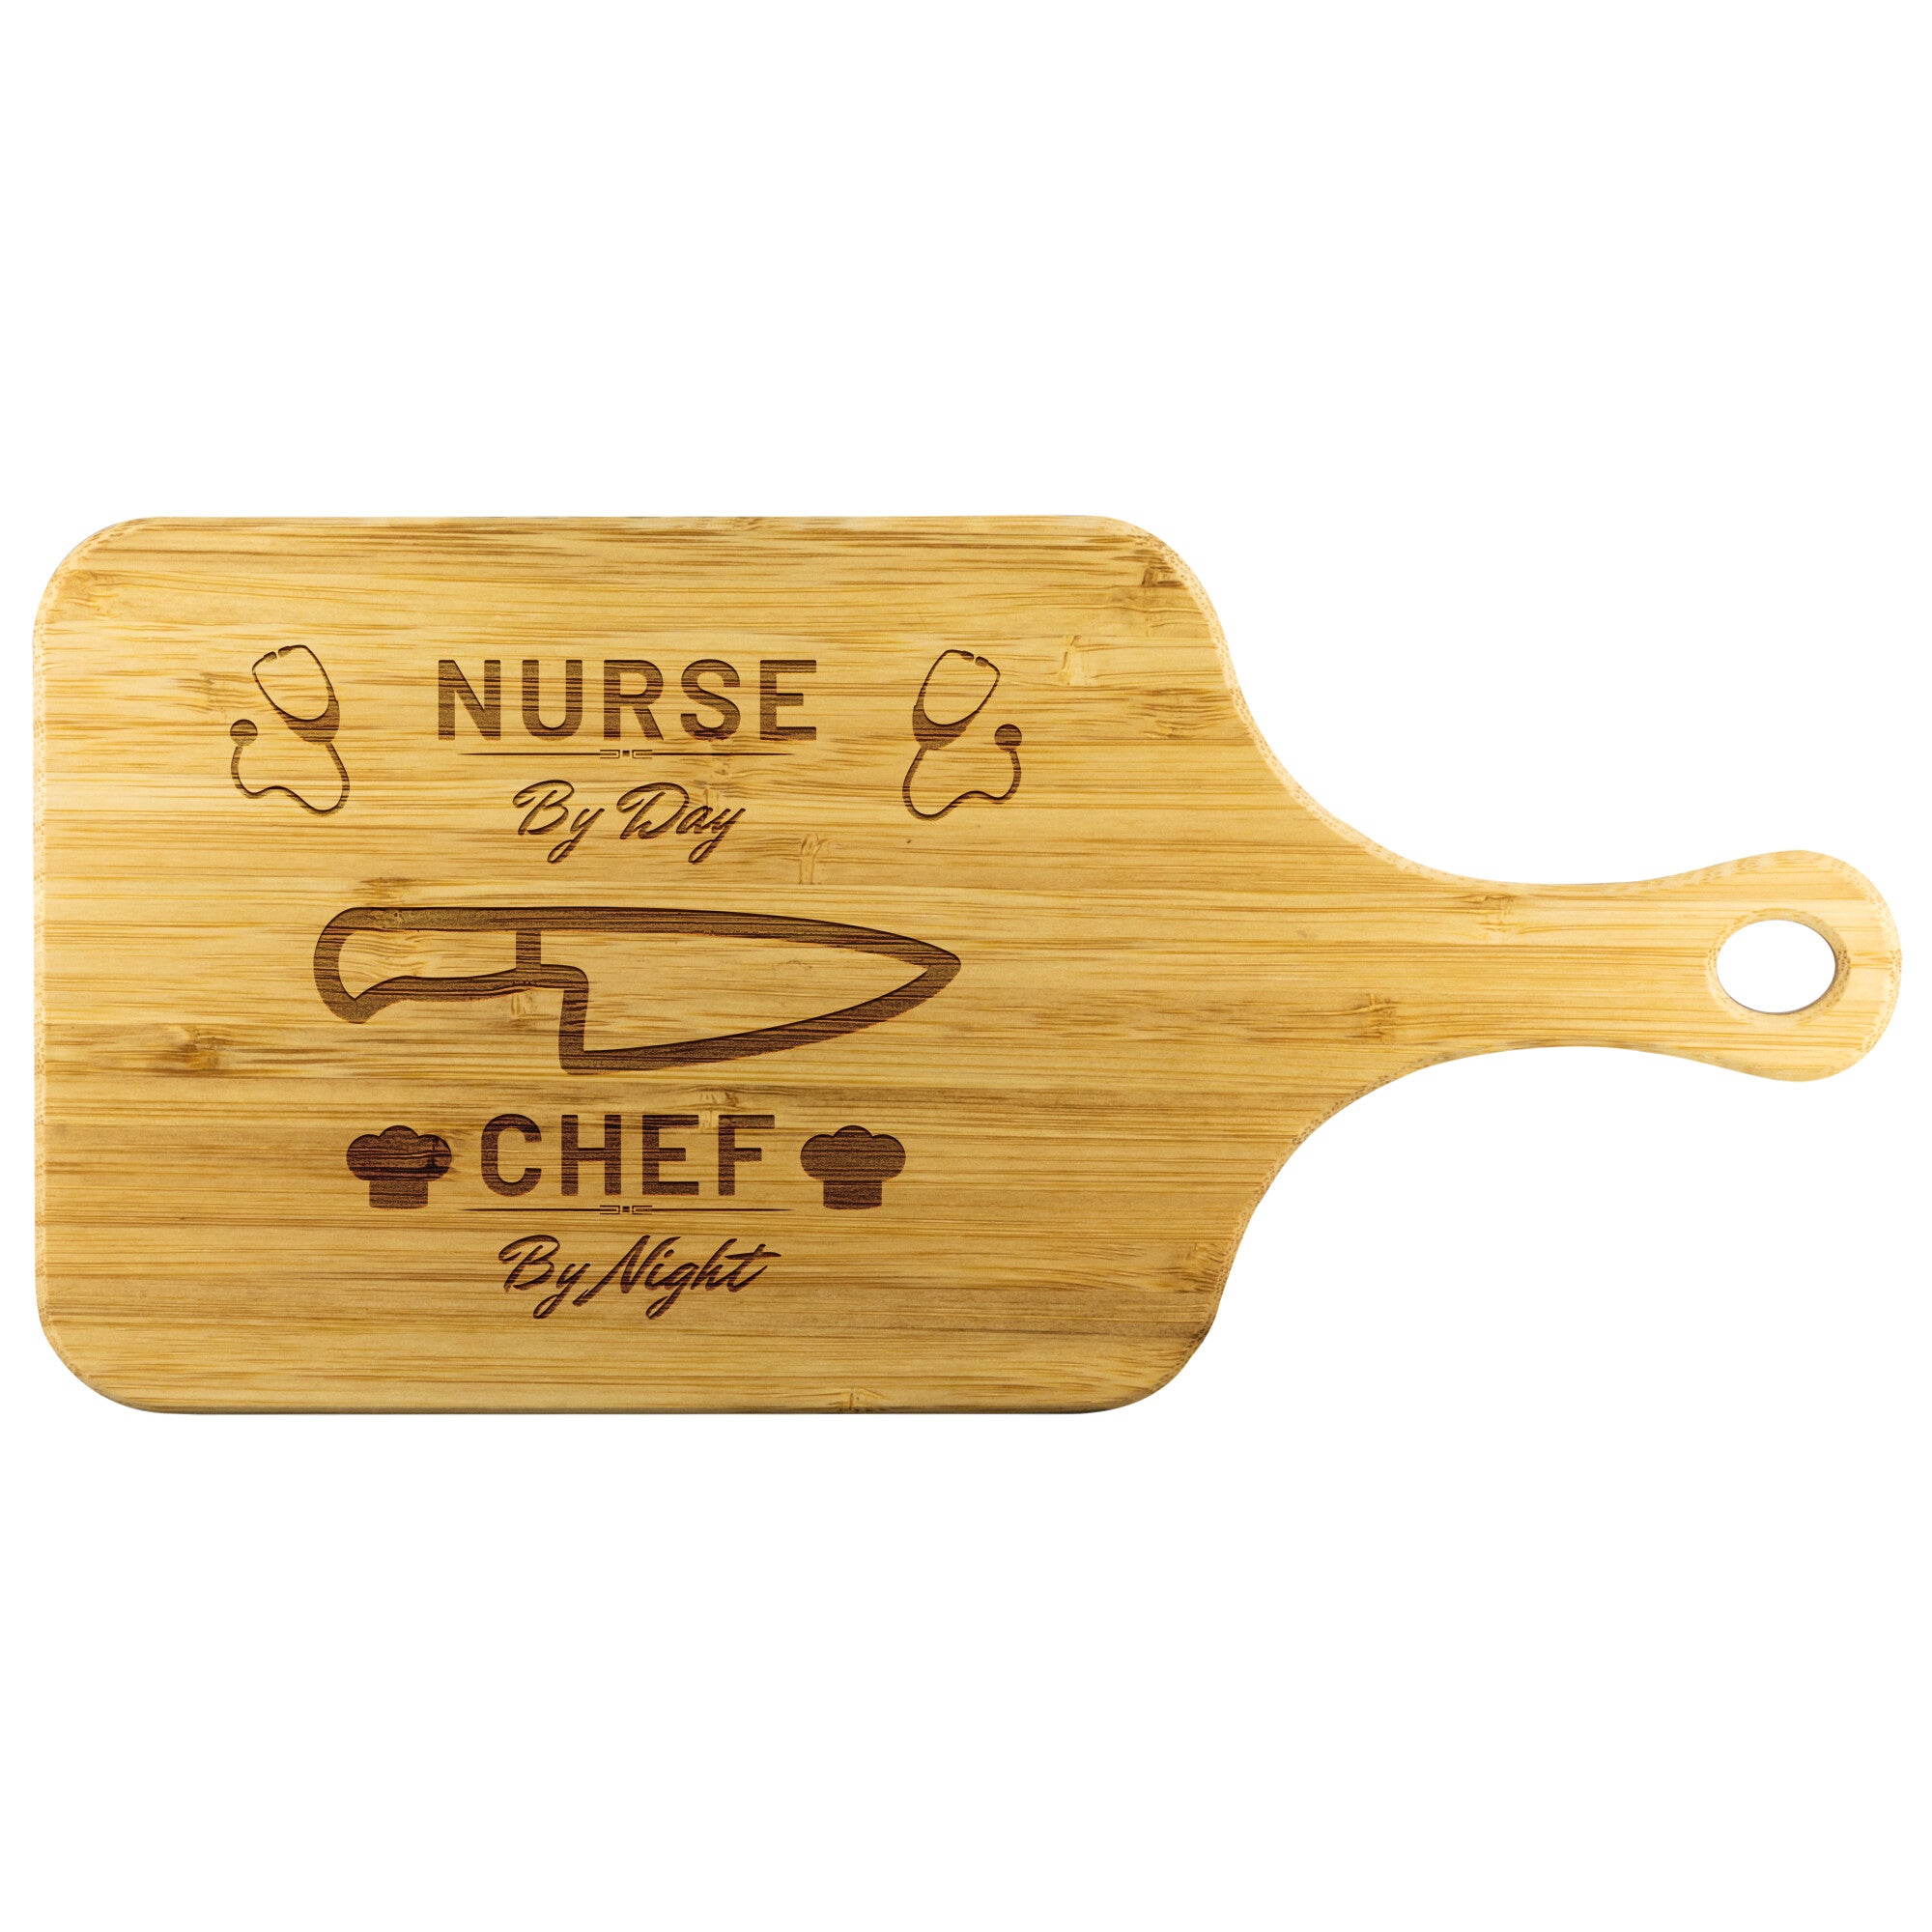 Nurse By Day Chef By Night Cutting Board | Kitchen Present For Nursing Professional